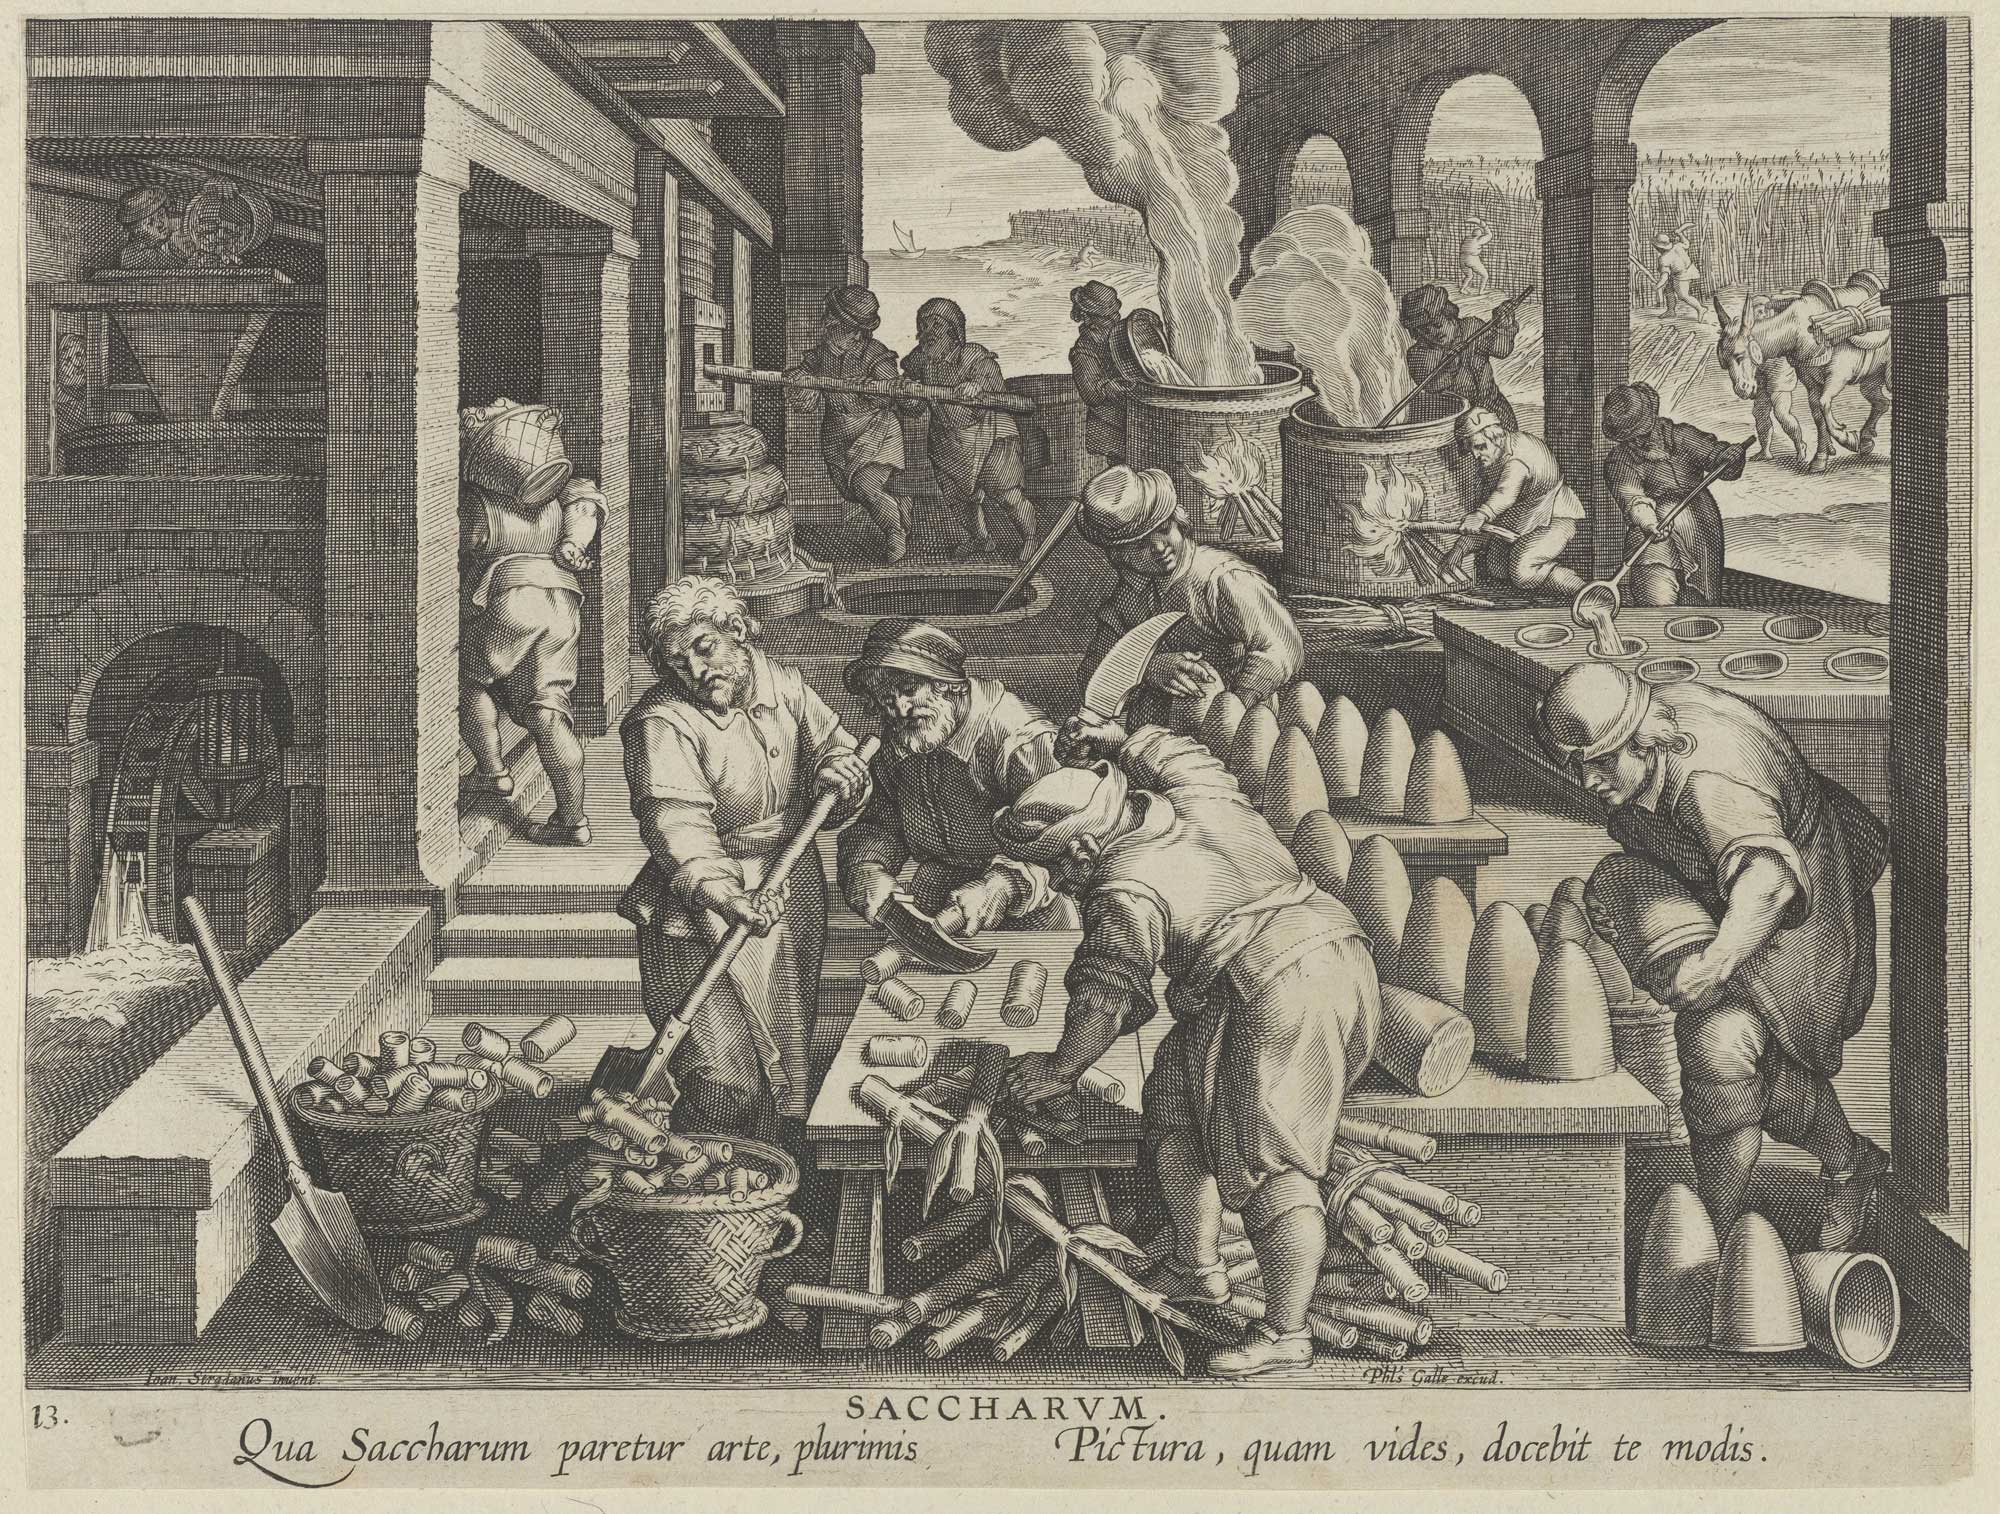 A Dutch engraving illustrating sugar-making from around 1600. In the upper right, men can be seen harvesting sugarcane. In the center foreground, the sugarcane is being cut into pieces. To the left, a man carries cane pieces in a basket toward a hopper; another man can be seen pouring sugarcane pieces into the hopper at the upper left. In the center back, men can be seen operating a grinder, with the juice be collected in a depression in the floor. To the right, another man pours sugarcane juice into a vat, where it is boiled over a fire. Anther man can be seen skimming the boiling juice. In the center right, a man pours the concentrated juice into molds. Finally, to the right of the men cutting sugarcane, men remove sugar loaves from molds and arrange them on tables.